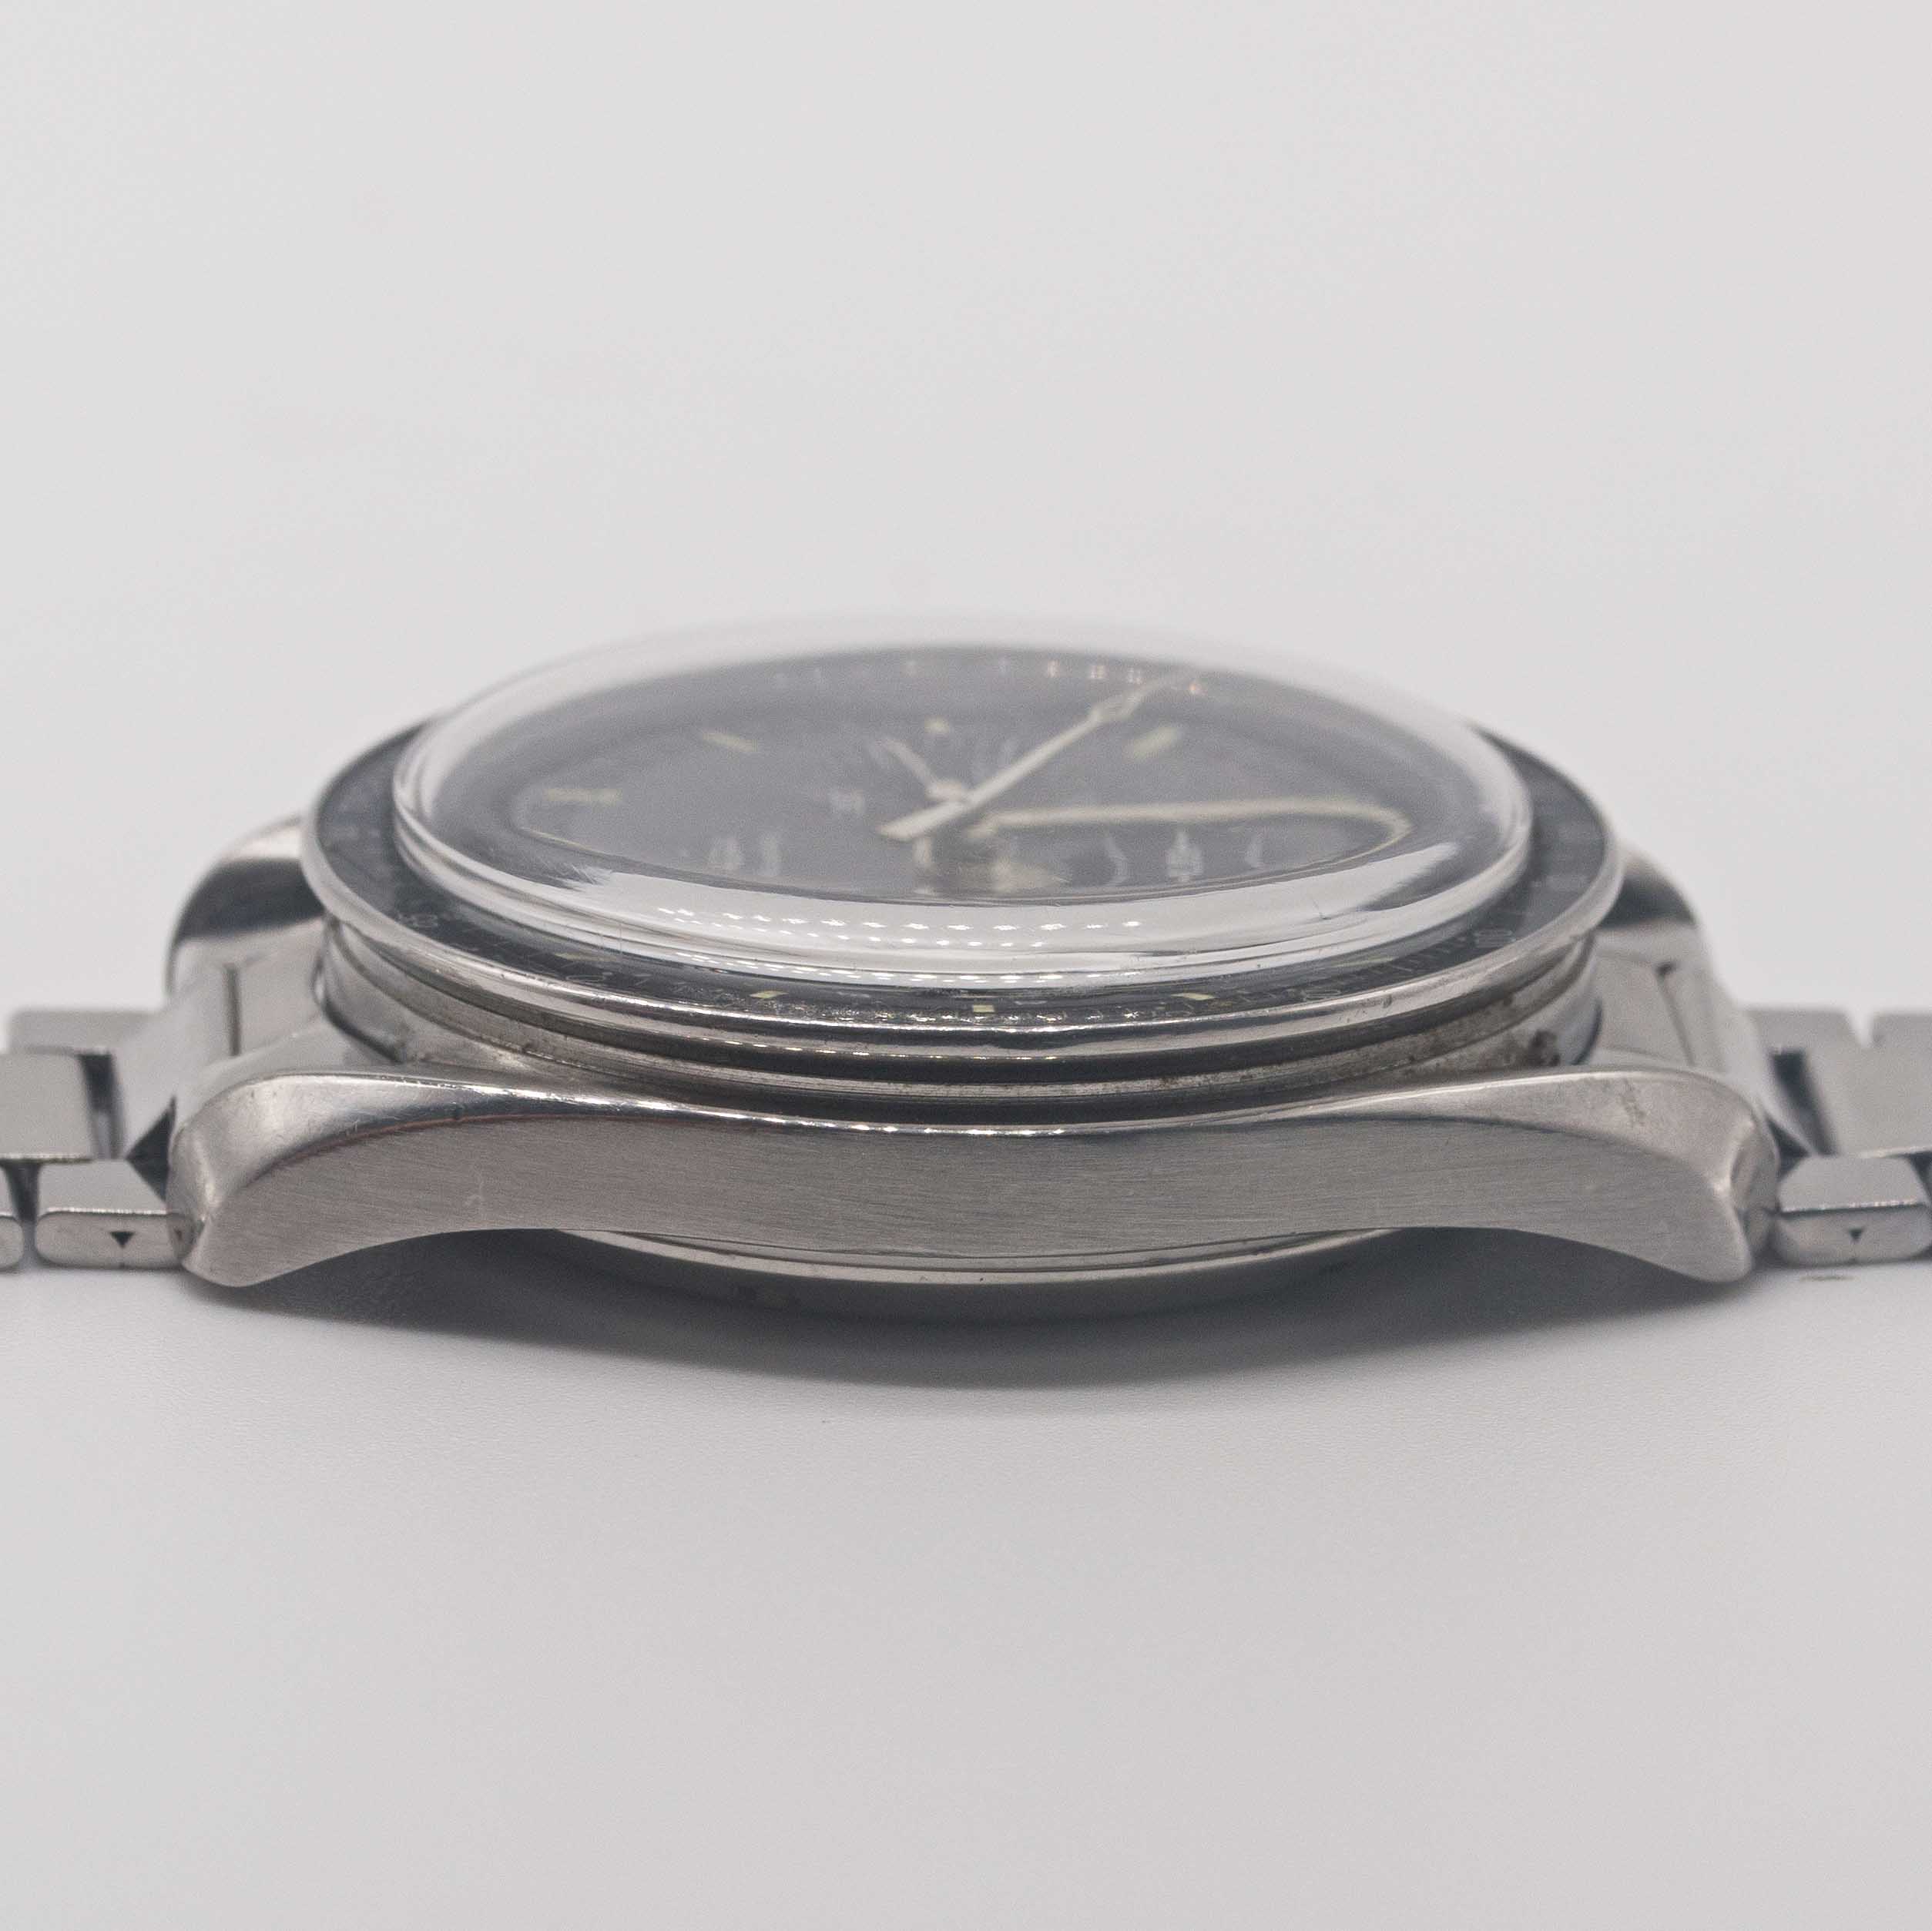 A VERY RARE GENTLEMAN'S STAINLESS STEEL OMEGA SPEEDMASTER "PRE MOON" CHRONOGRAPH BRACELET WATCH - Image 13 of 14